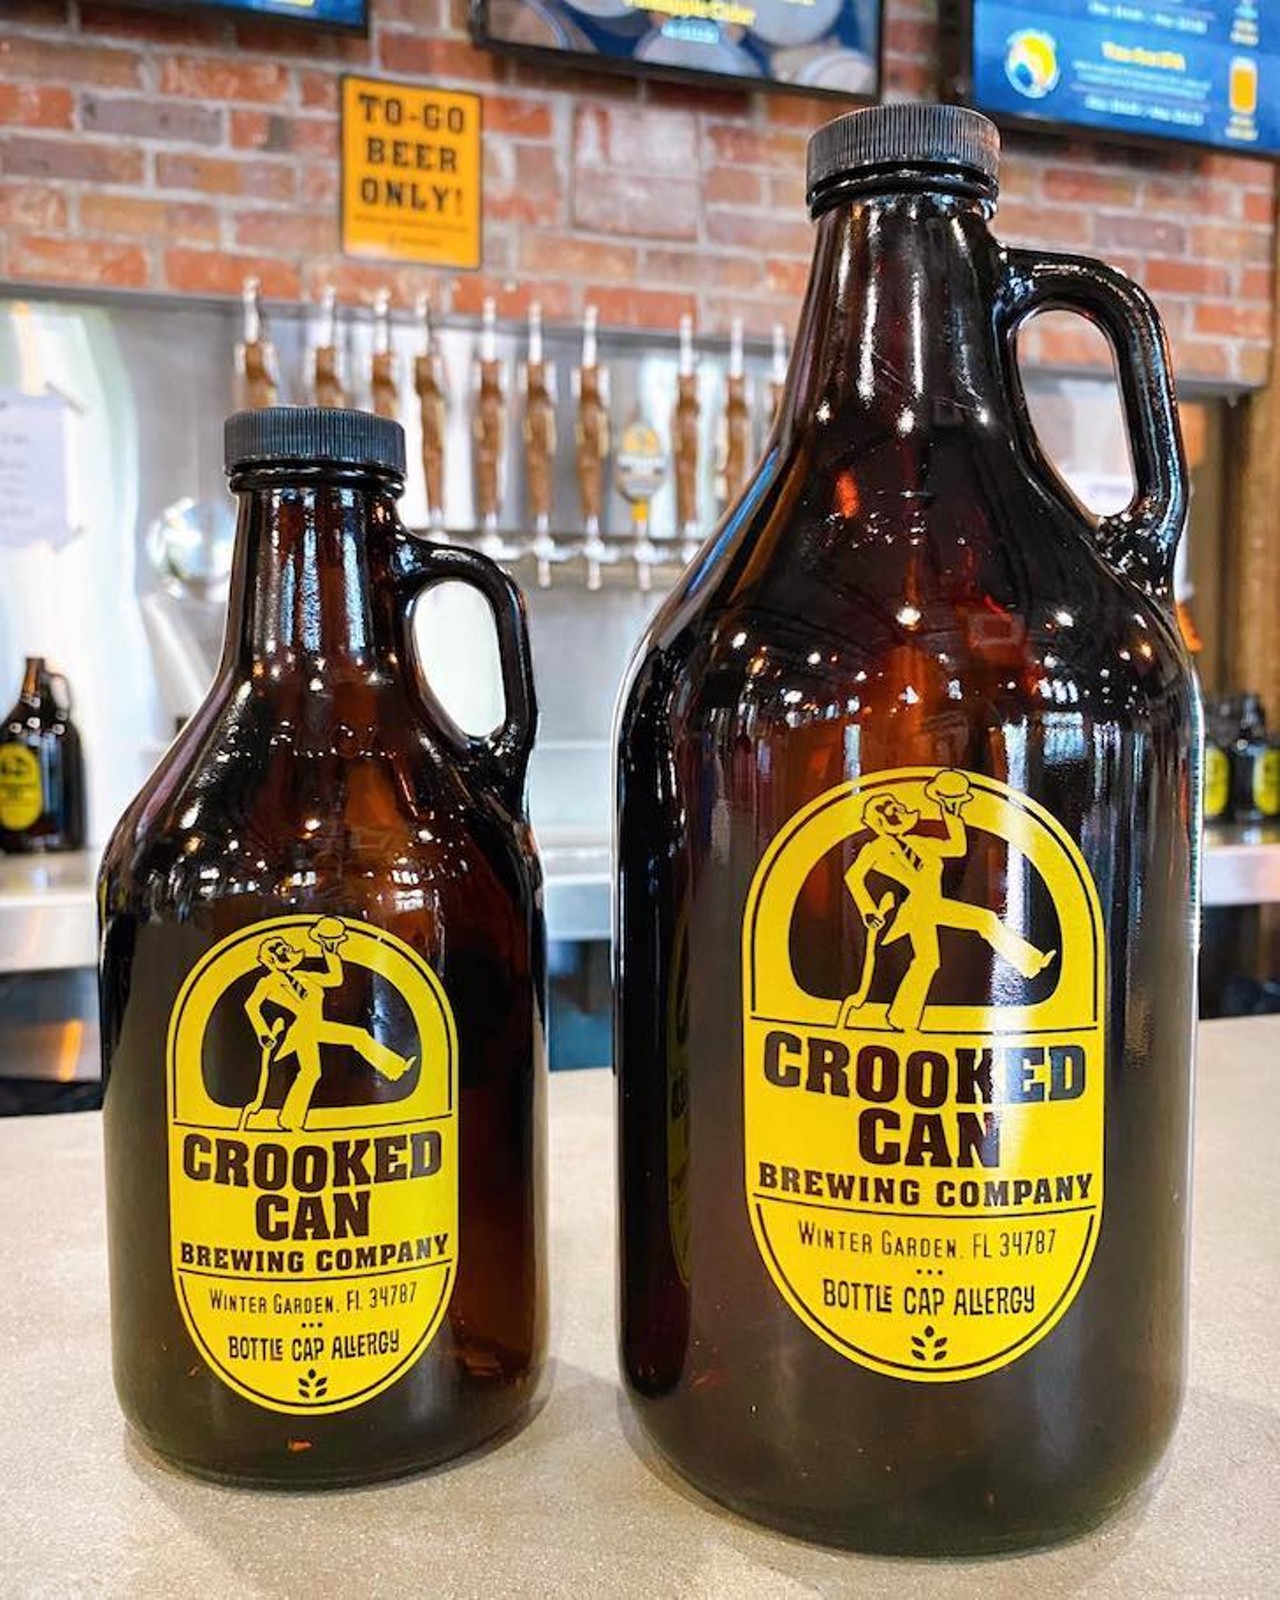 Crooked Can Brewing Company 
426 W. Plant St., Winter Garden, 407-395-9520
Crooked Can Brewing Company located in Downtown Winter Garden offers togo beer from 12 p.m. to 6 p.m. and as of May 13, the brewery has expanded to include online ordering. Customers can fill up their 32 ounce glass growlers or take home a glass bottle or can.
Photo via Crooked Can Brewing Company/Facebook